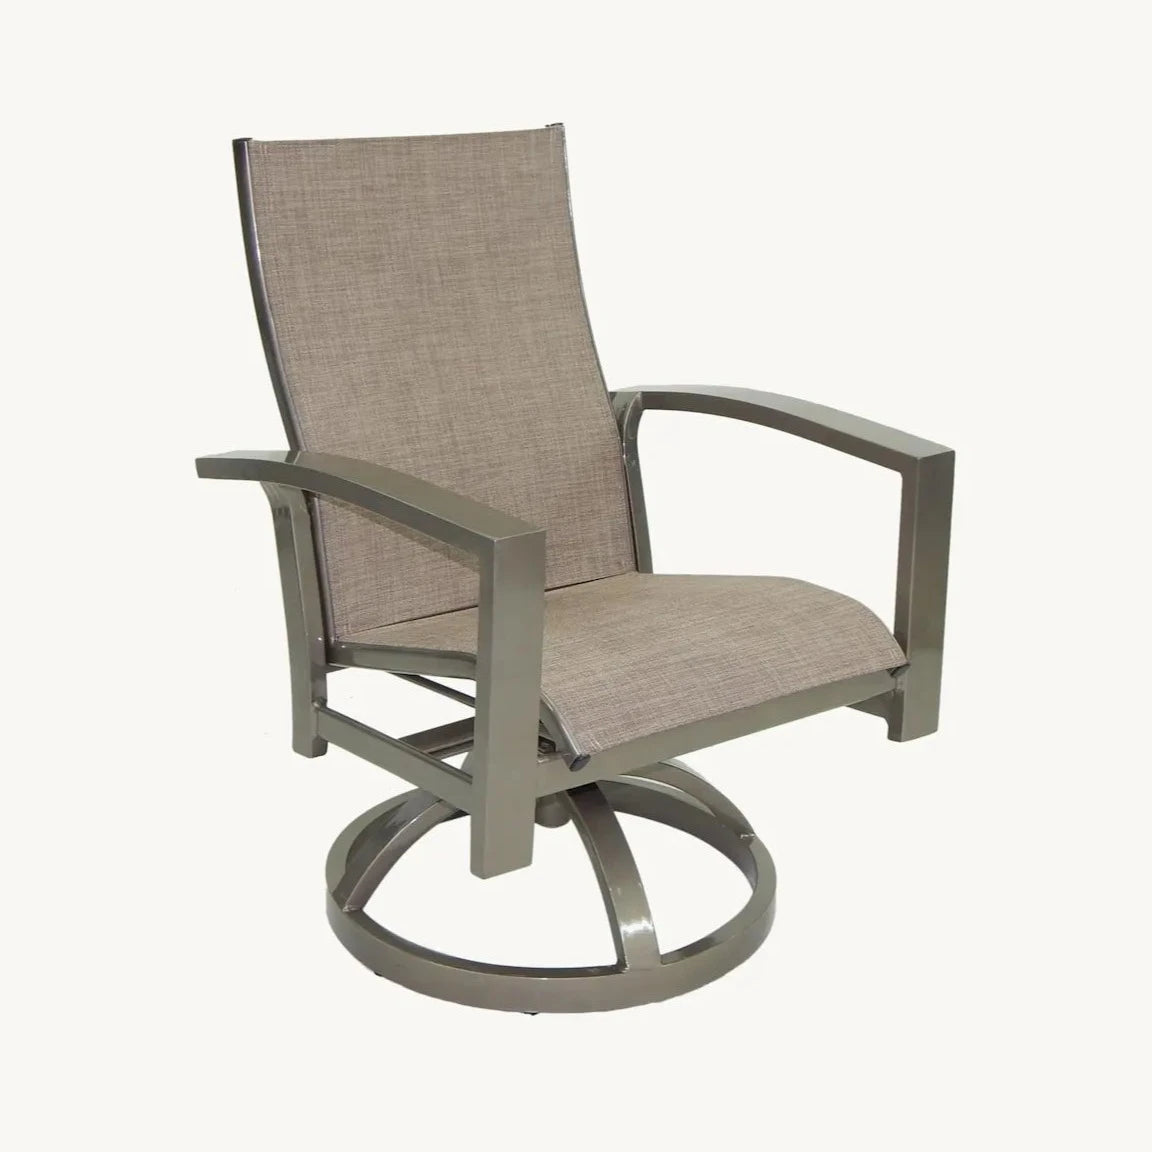 Castelle Orion Sling Dining Swivel Rocker Chair in Antique Dark Rum Finish with Augustine Oyster Sling 12037755